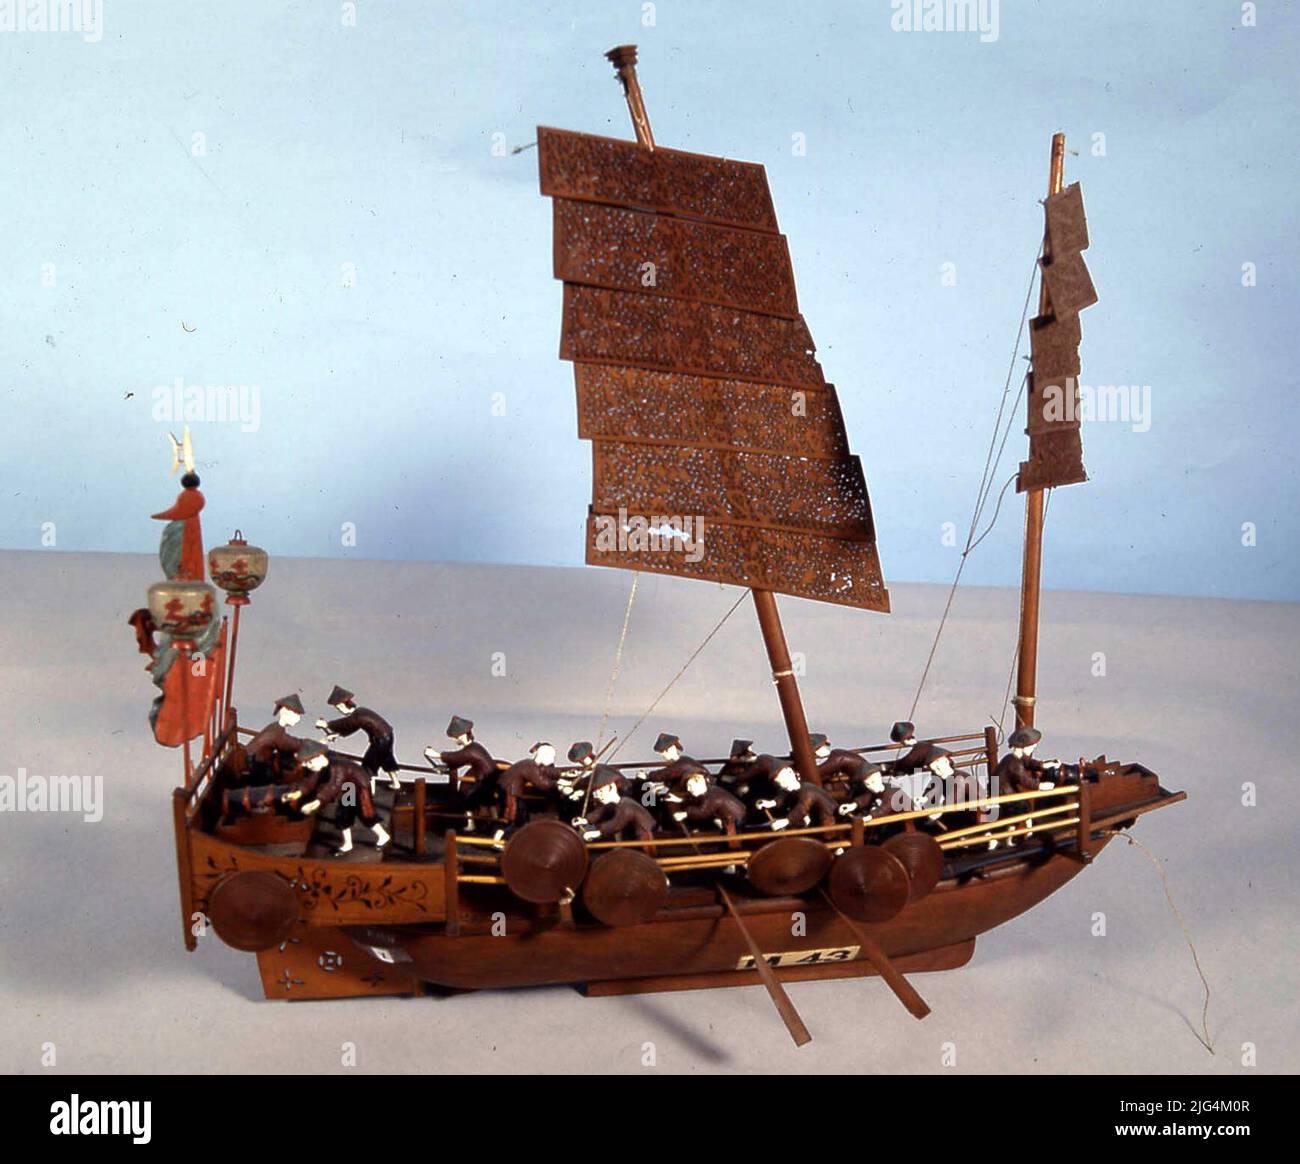 Model The Exvote of Lorcha China (Siglo XIX). Model. Fine, light and little draft vessel. The port and star is longitudinal, some hangers or reeds, somewhat separated from the board, where the shields or paves are hanging. The bow has an open and border platform where an artillery piece is placed. She arbola two sticks with very thin and dragging wooden candles with vegetable motifs divided into horizontal sections. She used to wander and oars. In the stern they have installed two other cannons and on the main terminal lanterns, among which standards or flags that may have religious symbology. Stock Photo